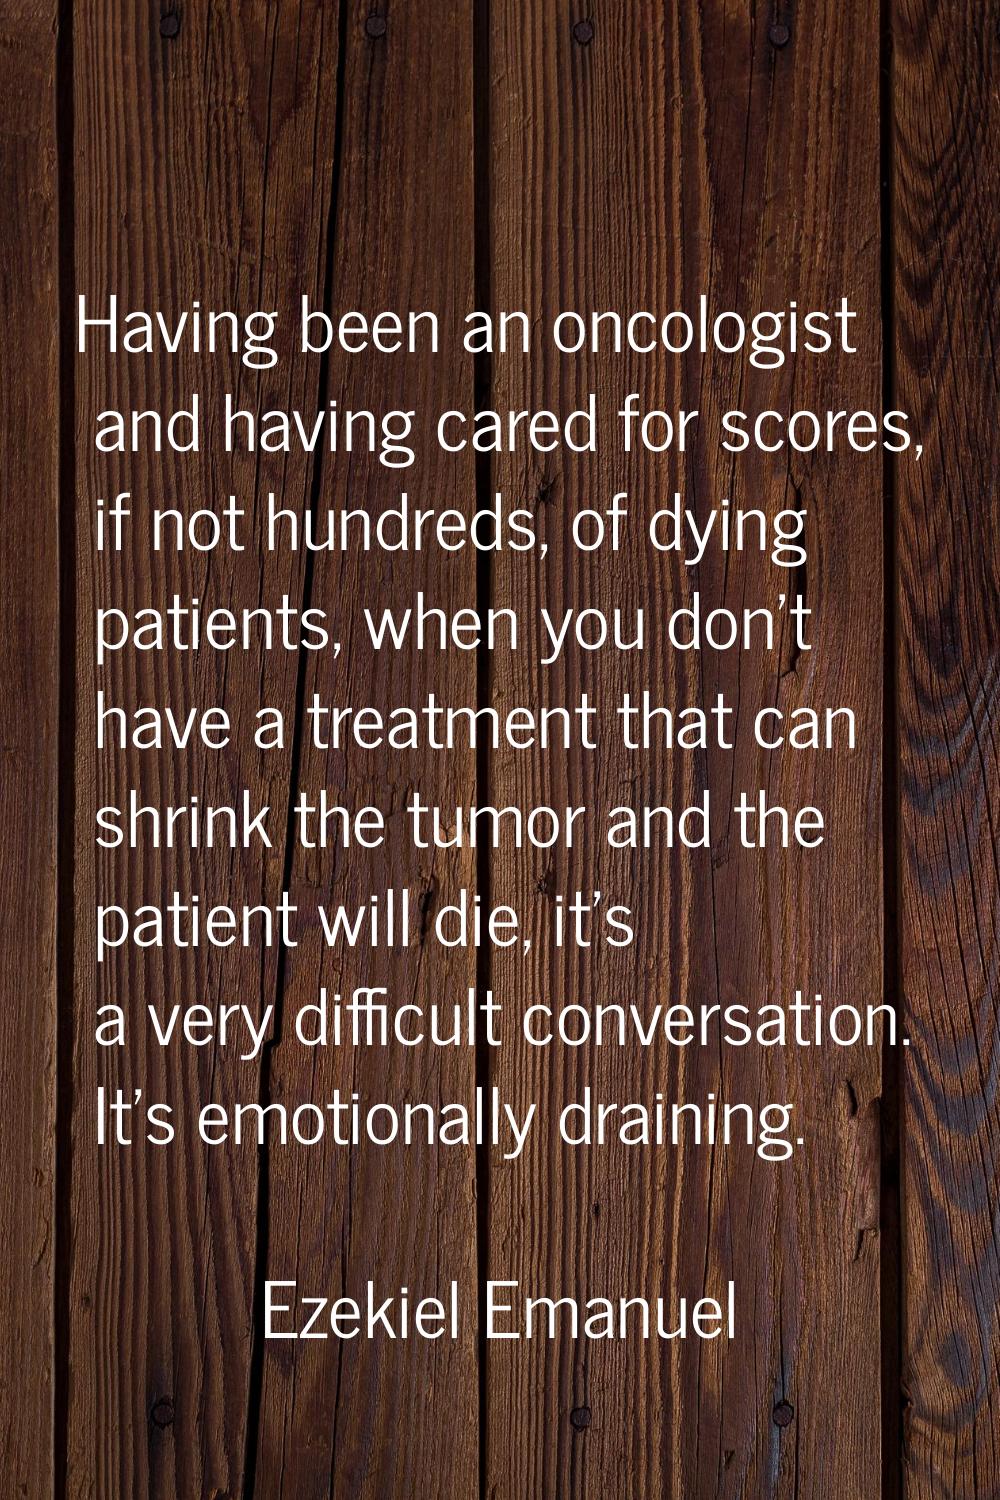 Having been an oncologist and having cared for scores, if not hundreds, of dying patients, when you